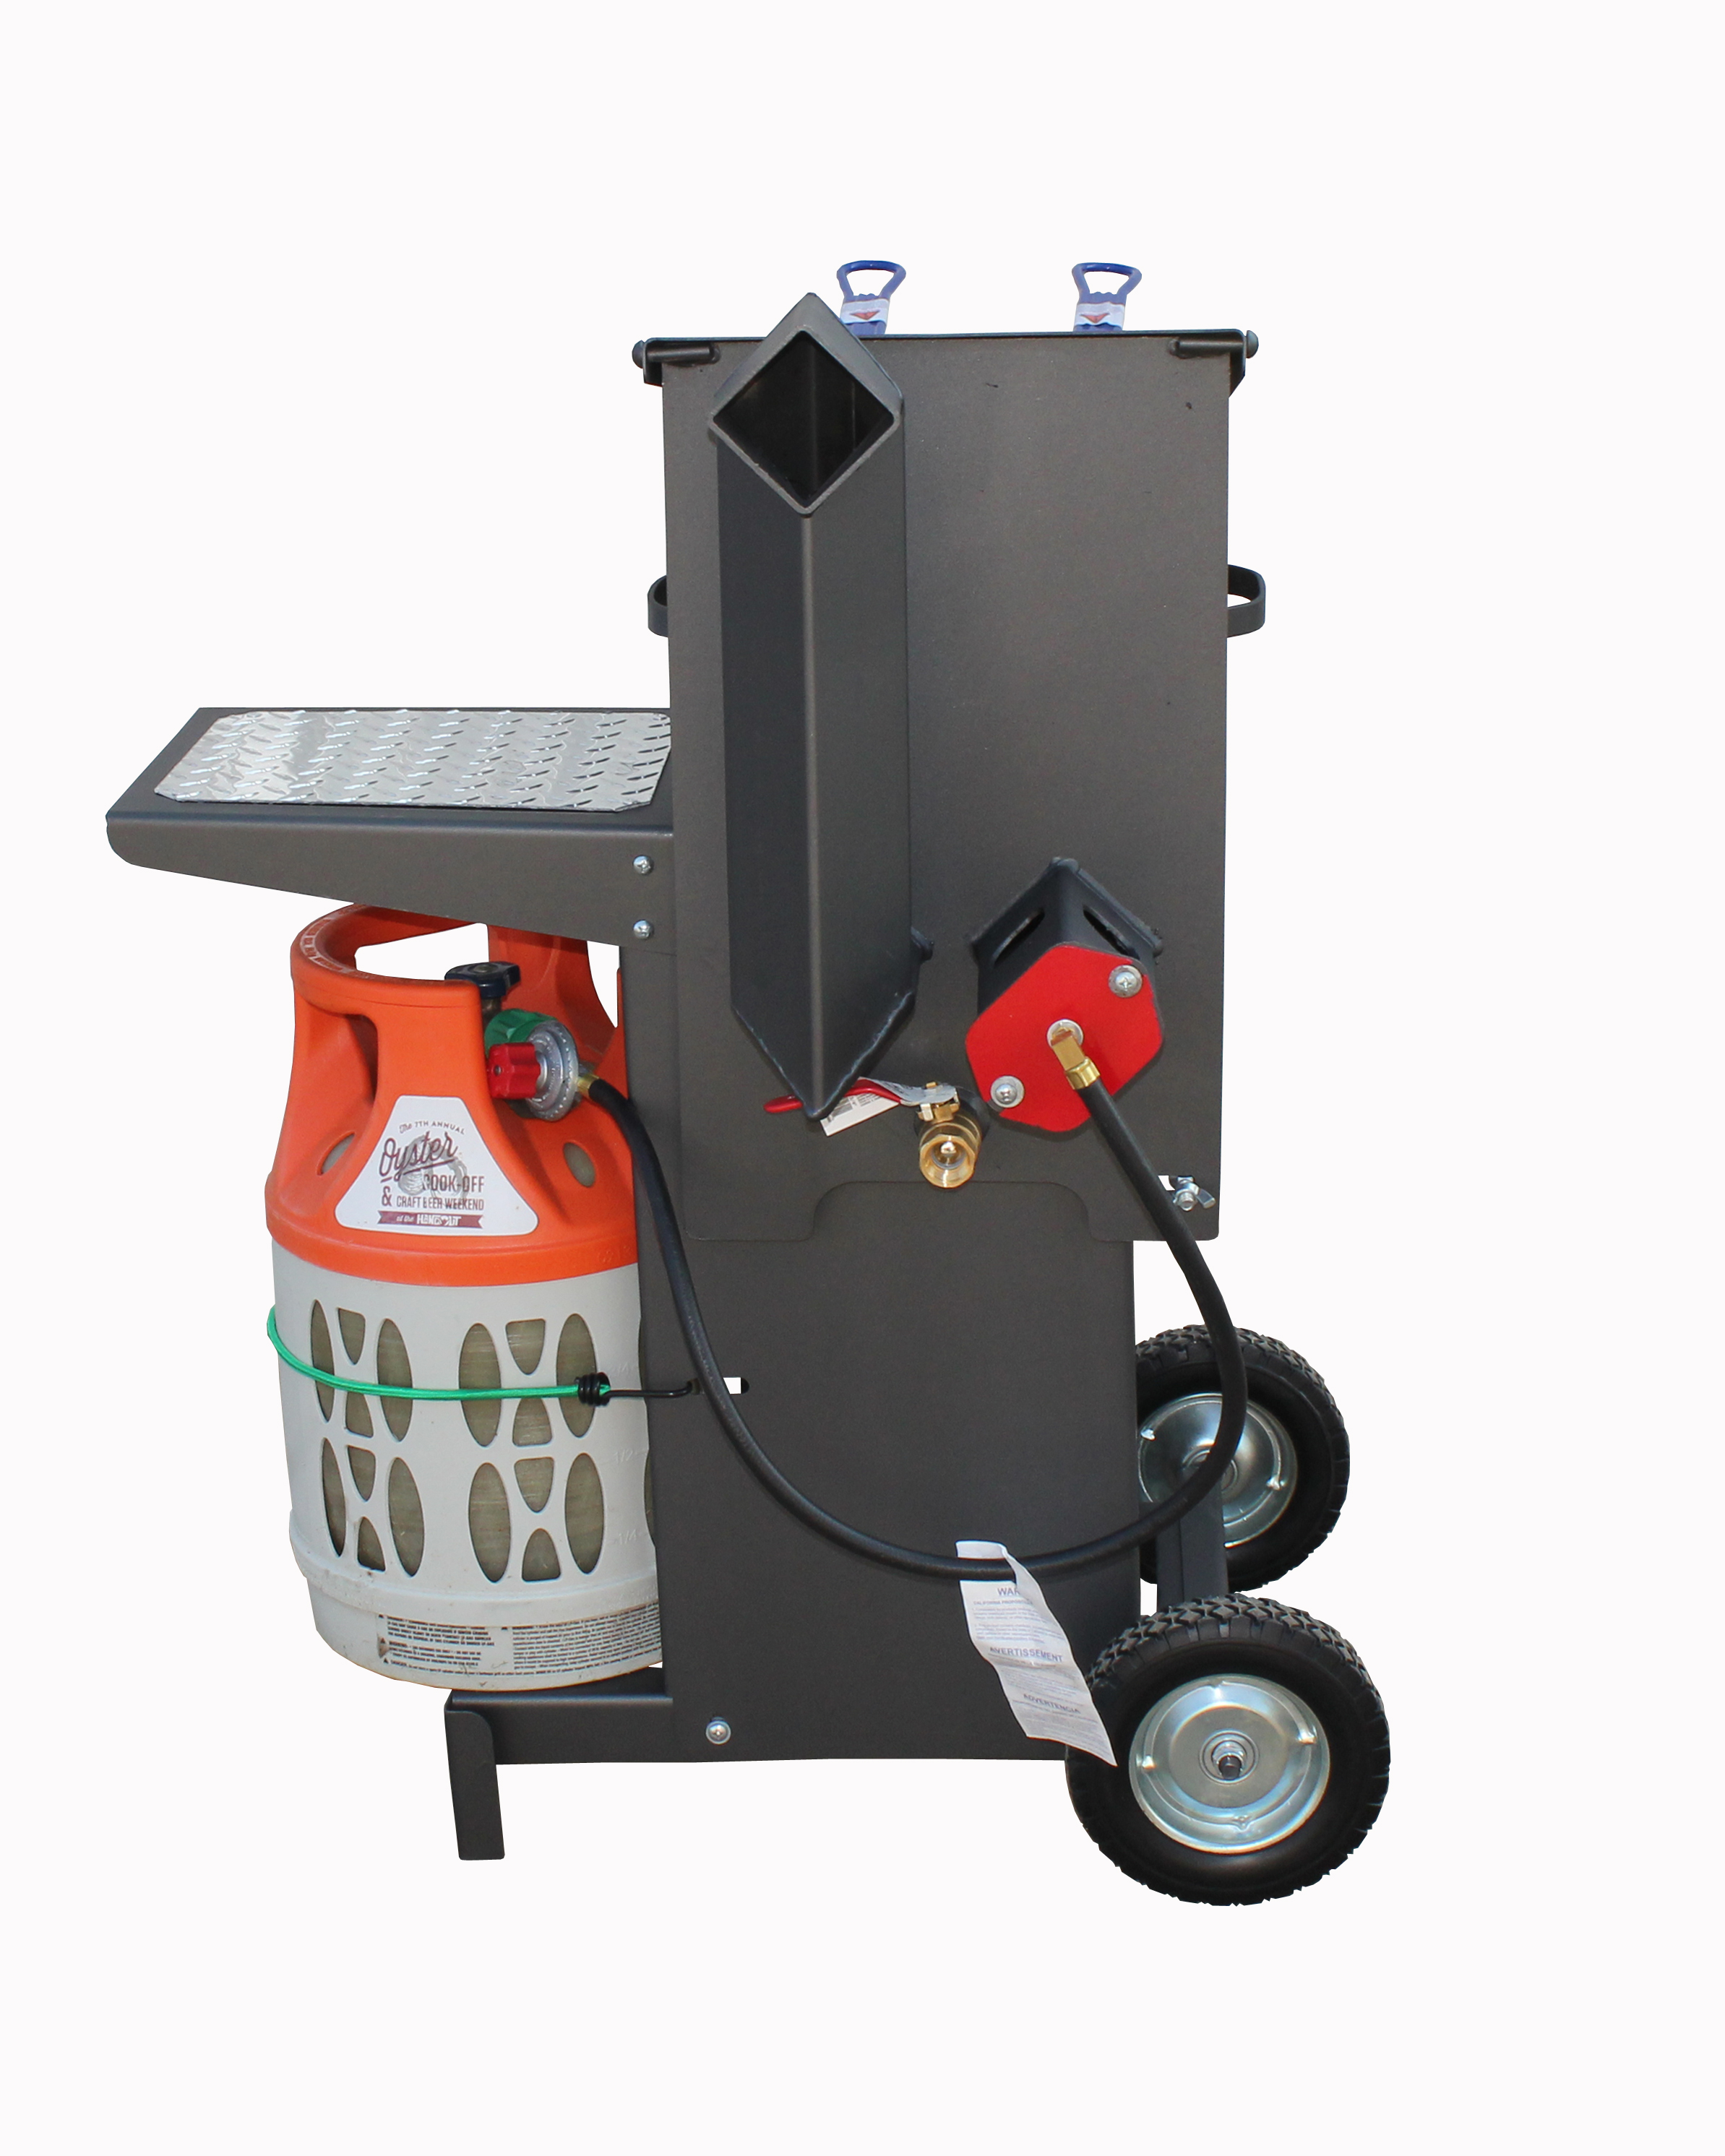 Cajun Fryer 6 Gallon Propane Gas Deep Fryer With Stand And 2 Baskets